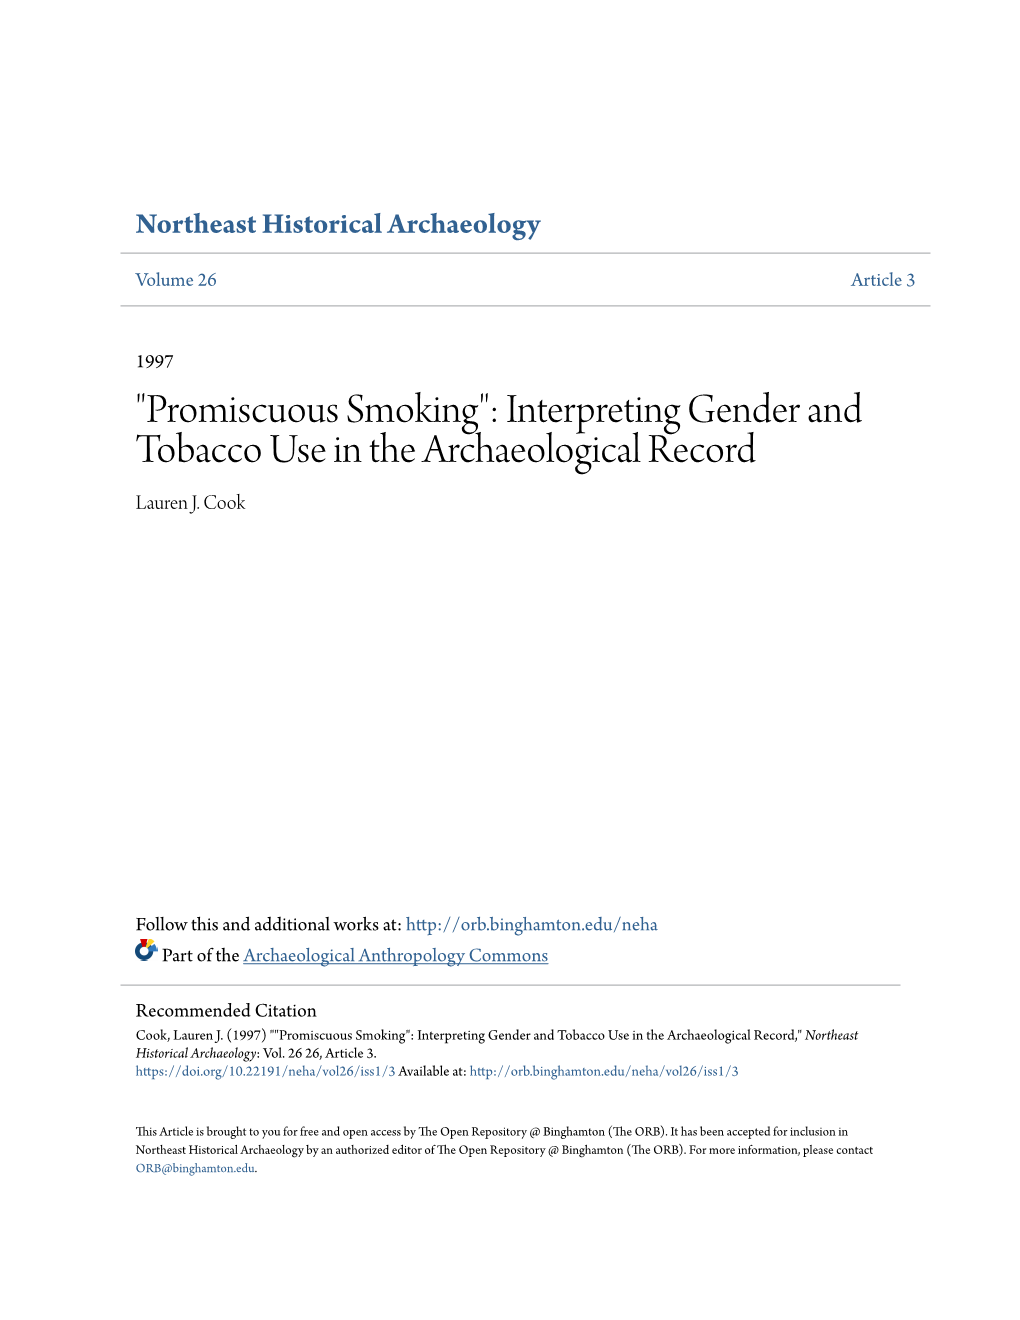 Promiscuous Smoking": Interpreting Gender and Tobacco Use in the Archaeological Record Lauren J